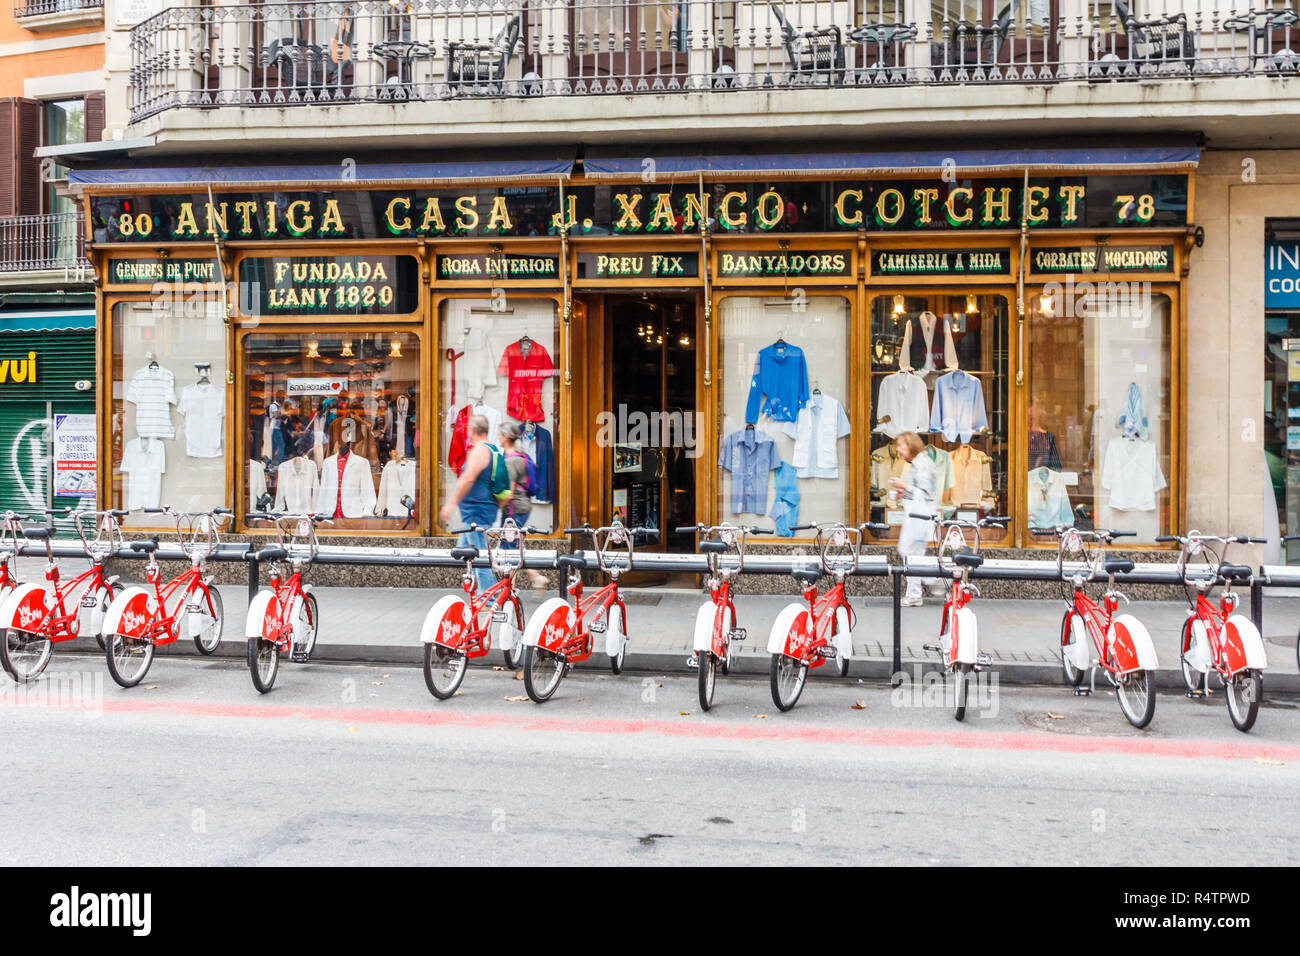 Barcelona, Spain - 4th October 2017: Bicycles parked outside clothing shop on Las Ramblas. The street is  very famous pedestrianised shopping area. Stock Photo